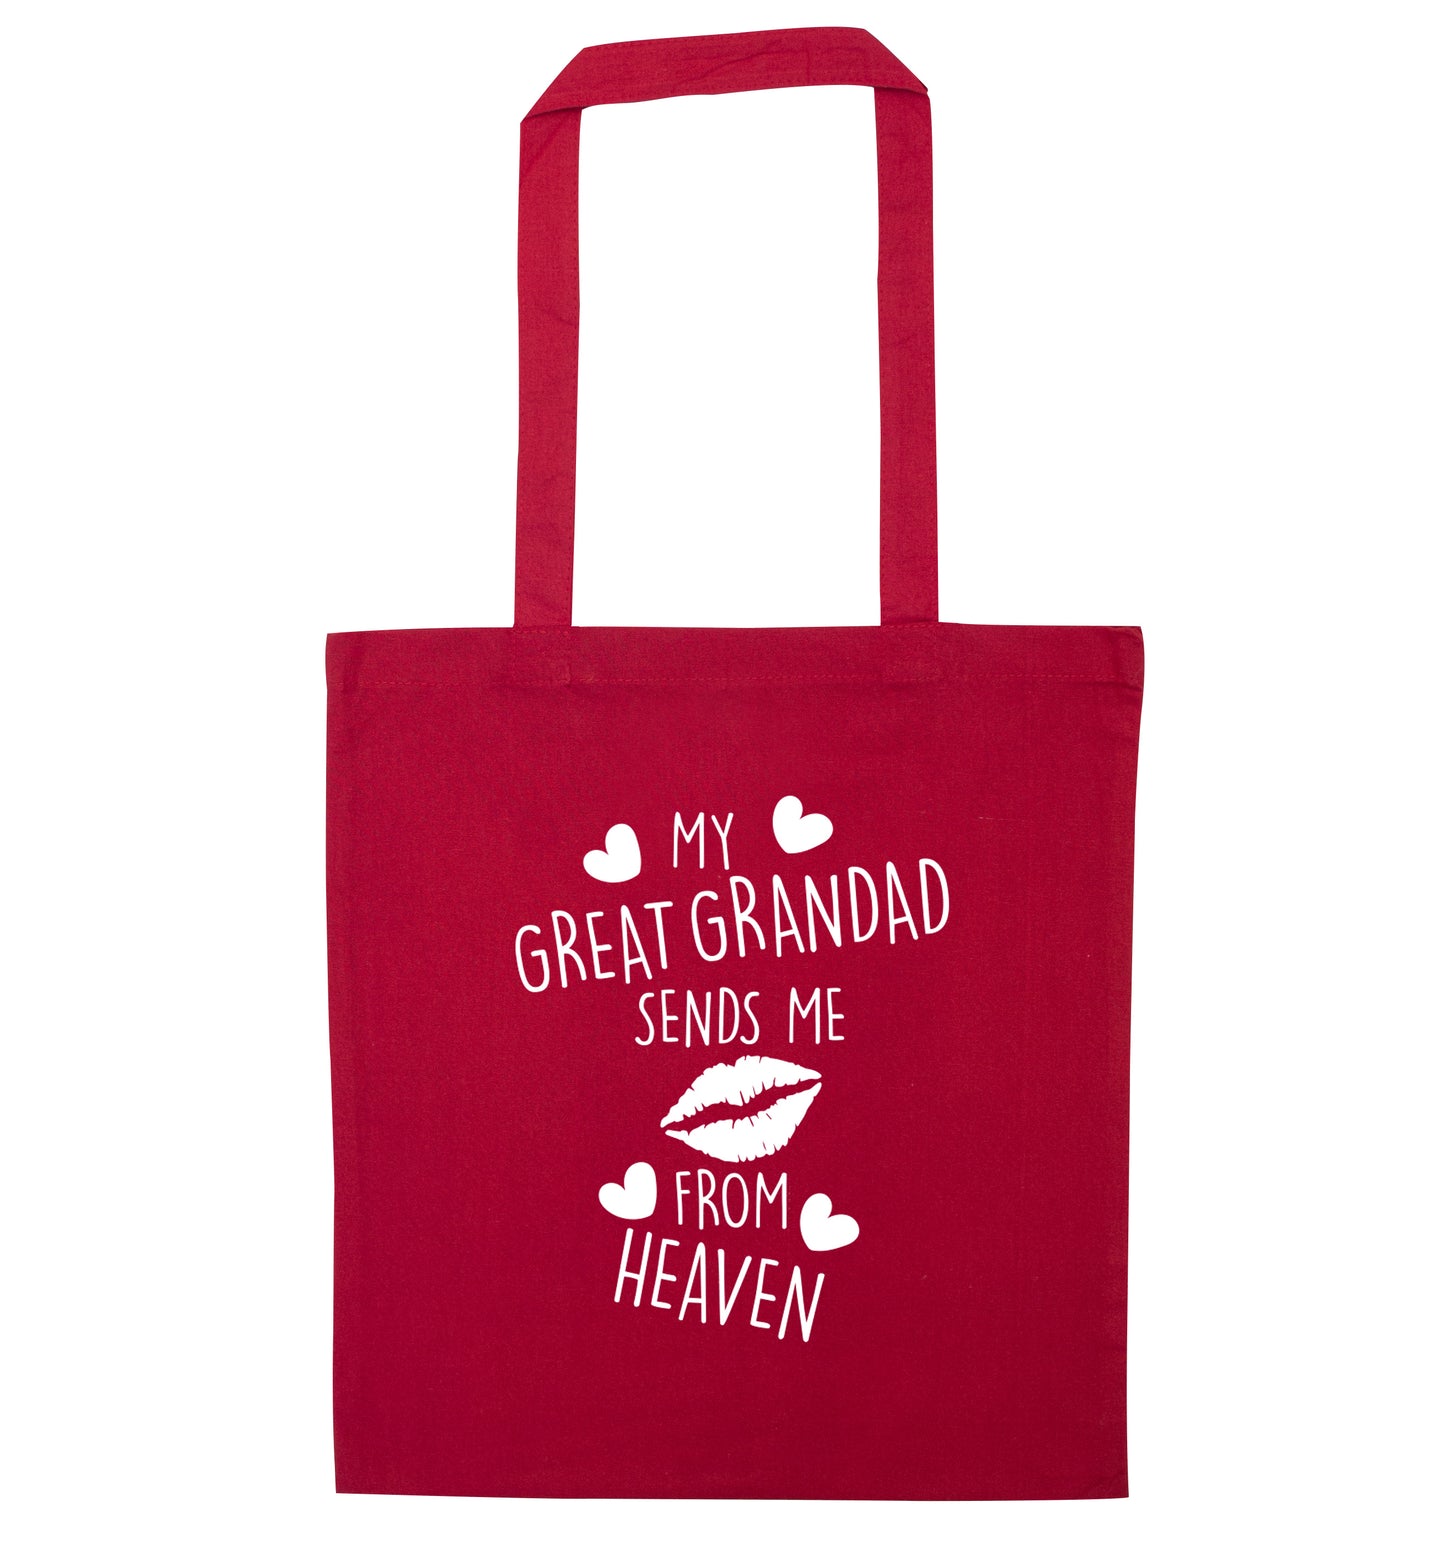 My great grandad sends me kisses from heaven red tote bag